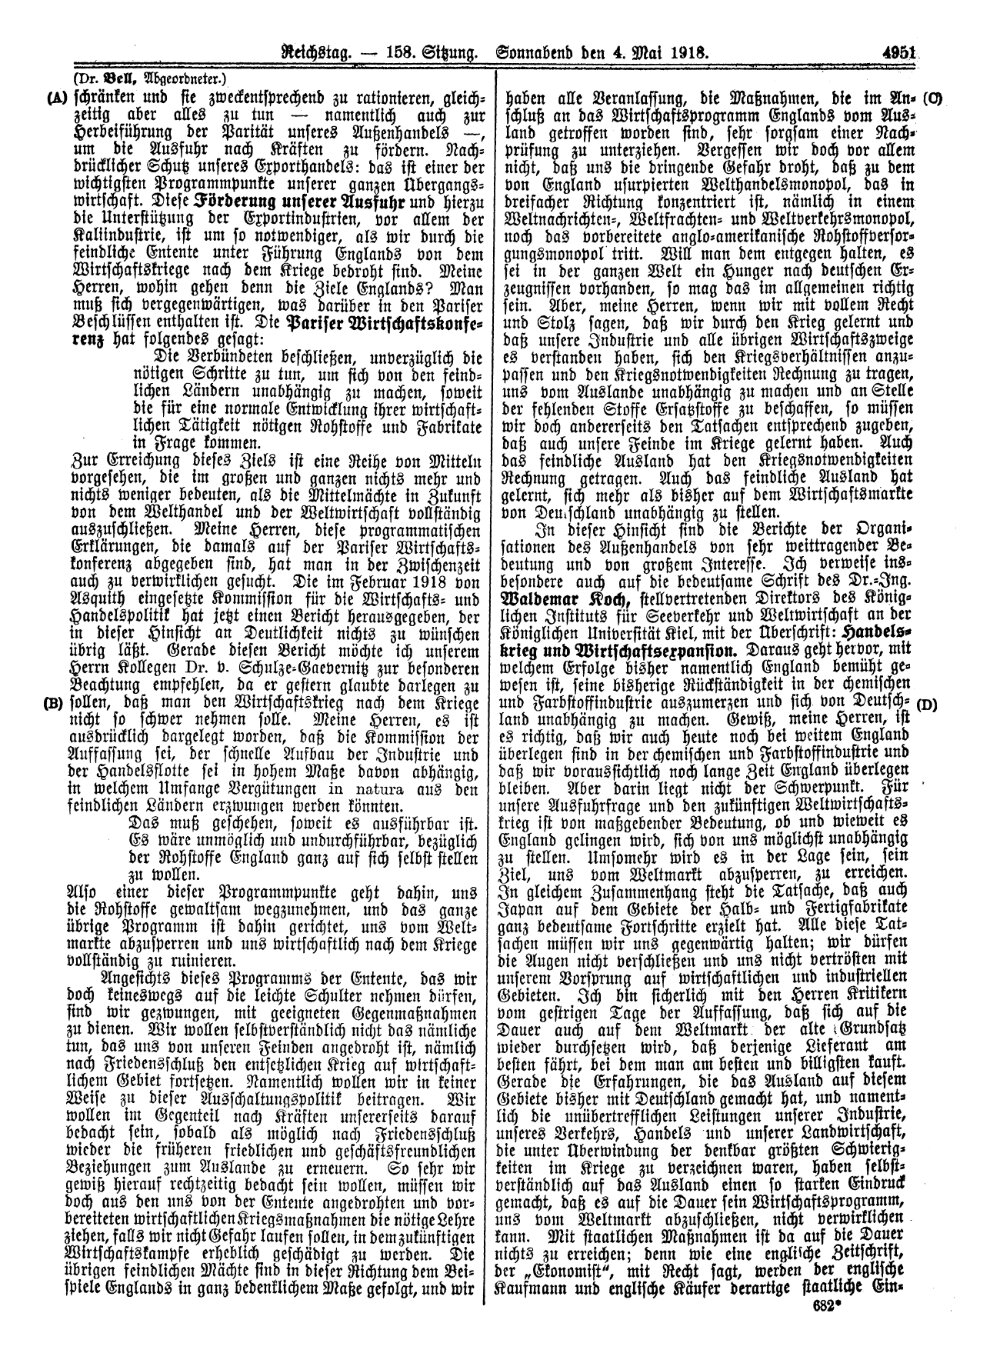 Scan of page 4951